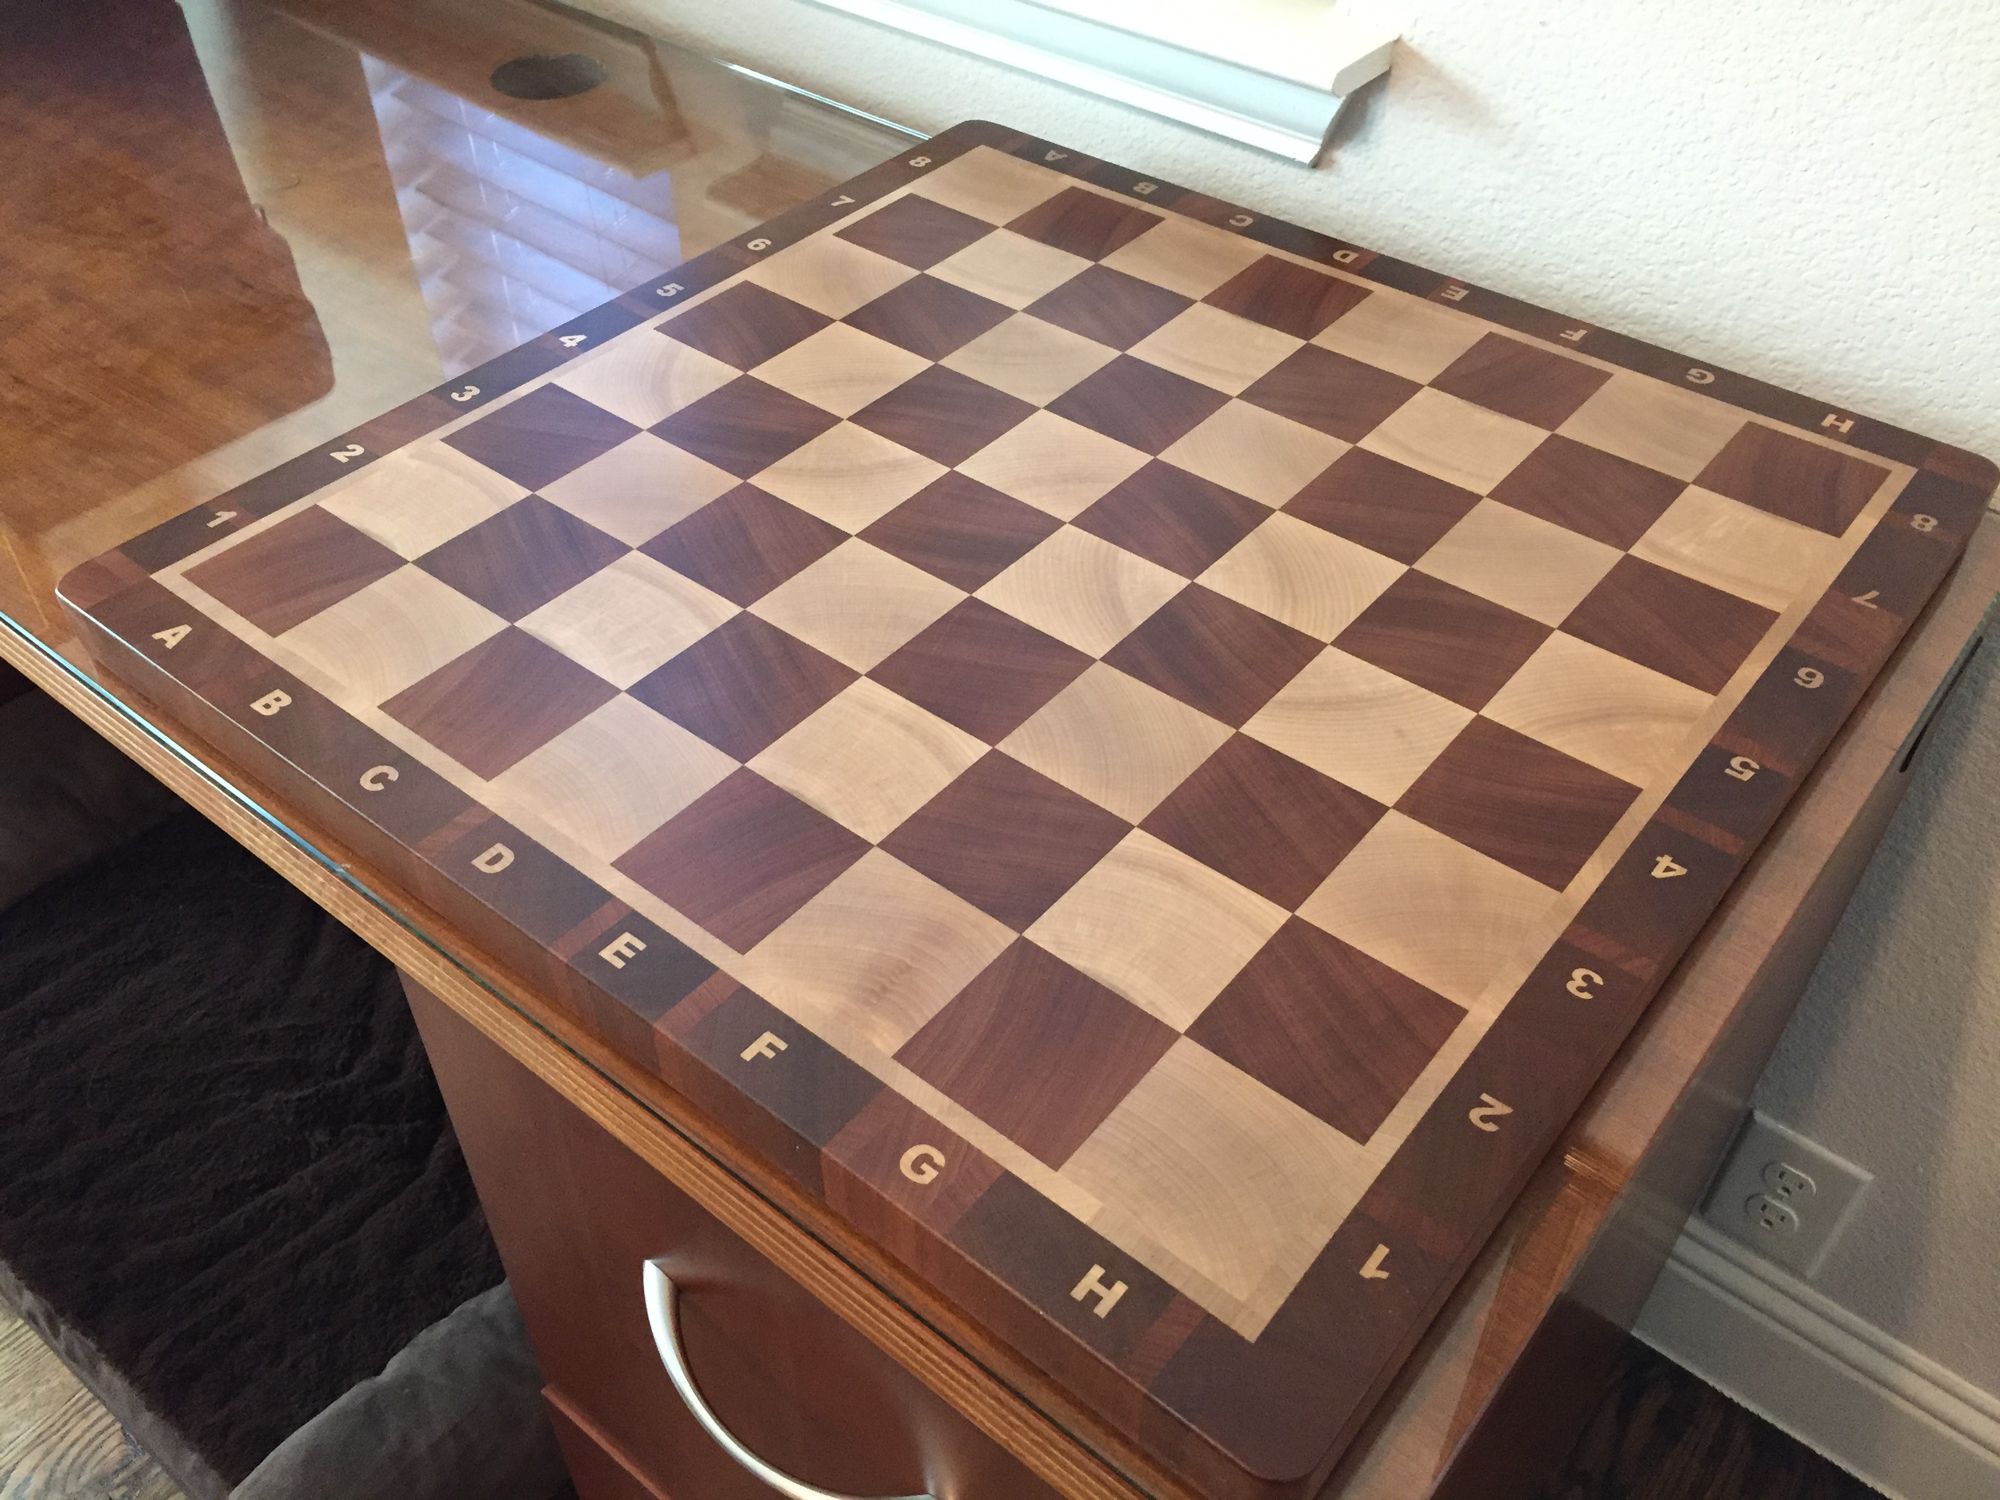 Russian Chess Board (MTM Wood) for sale ON THE CHEAP! - Chess Forums - Chess .com